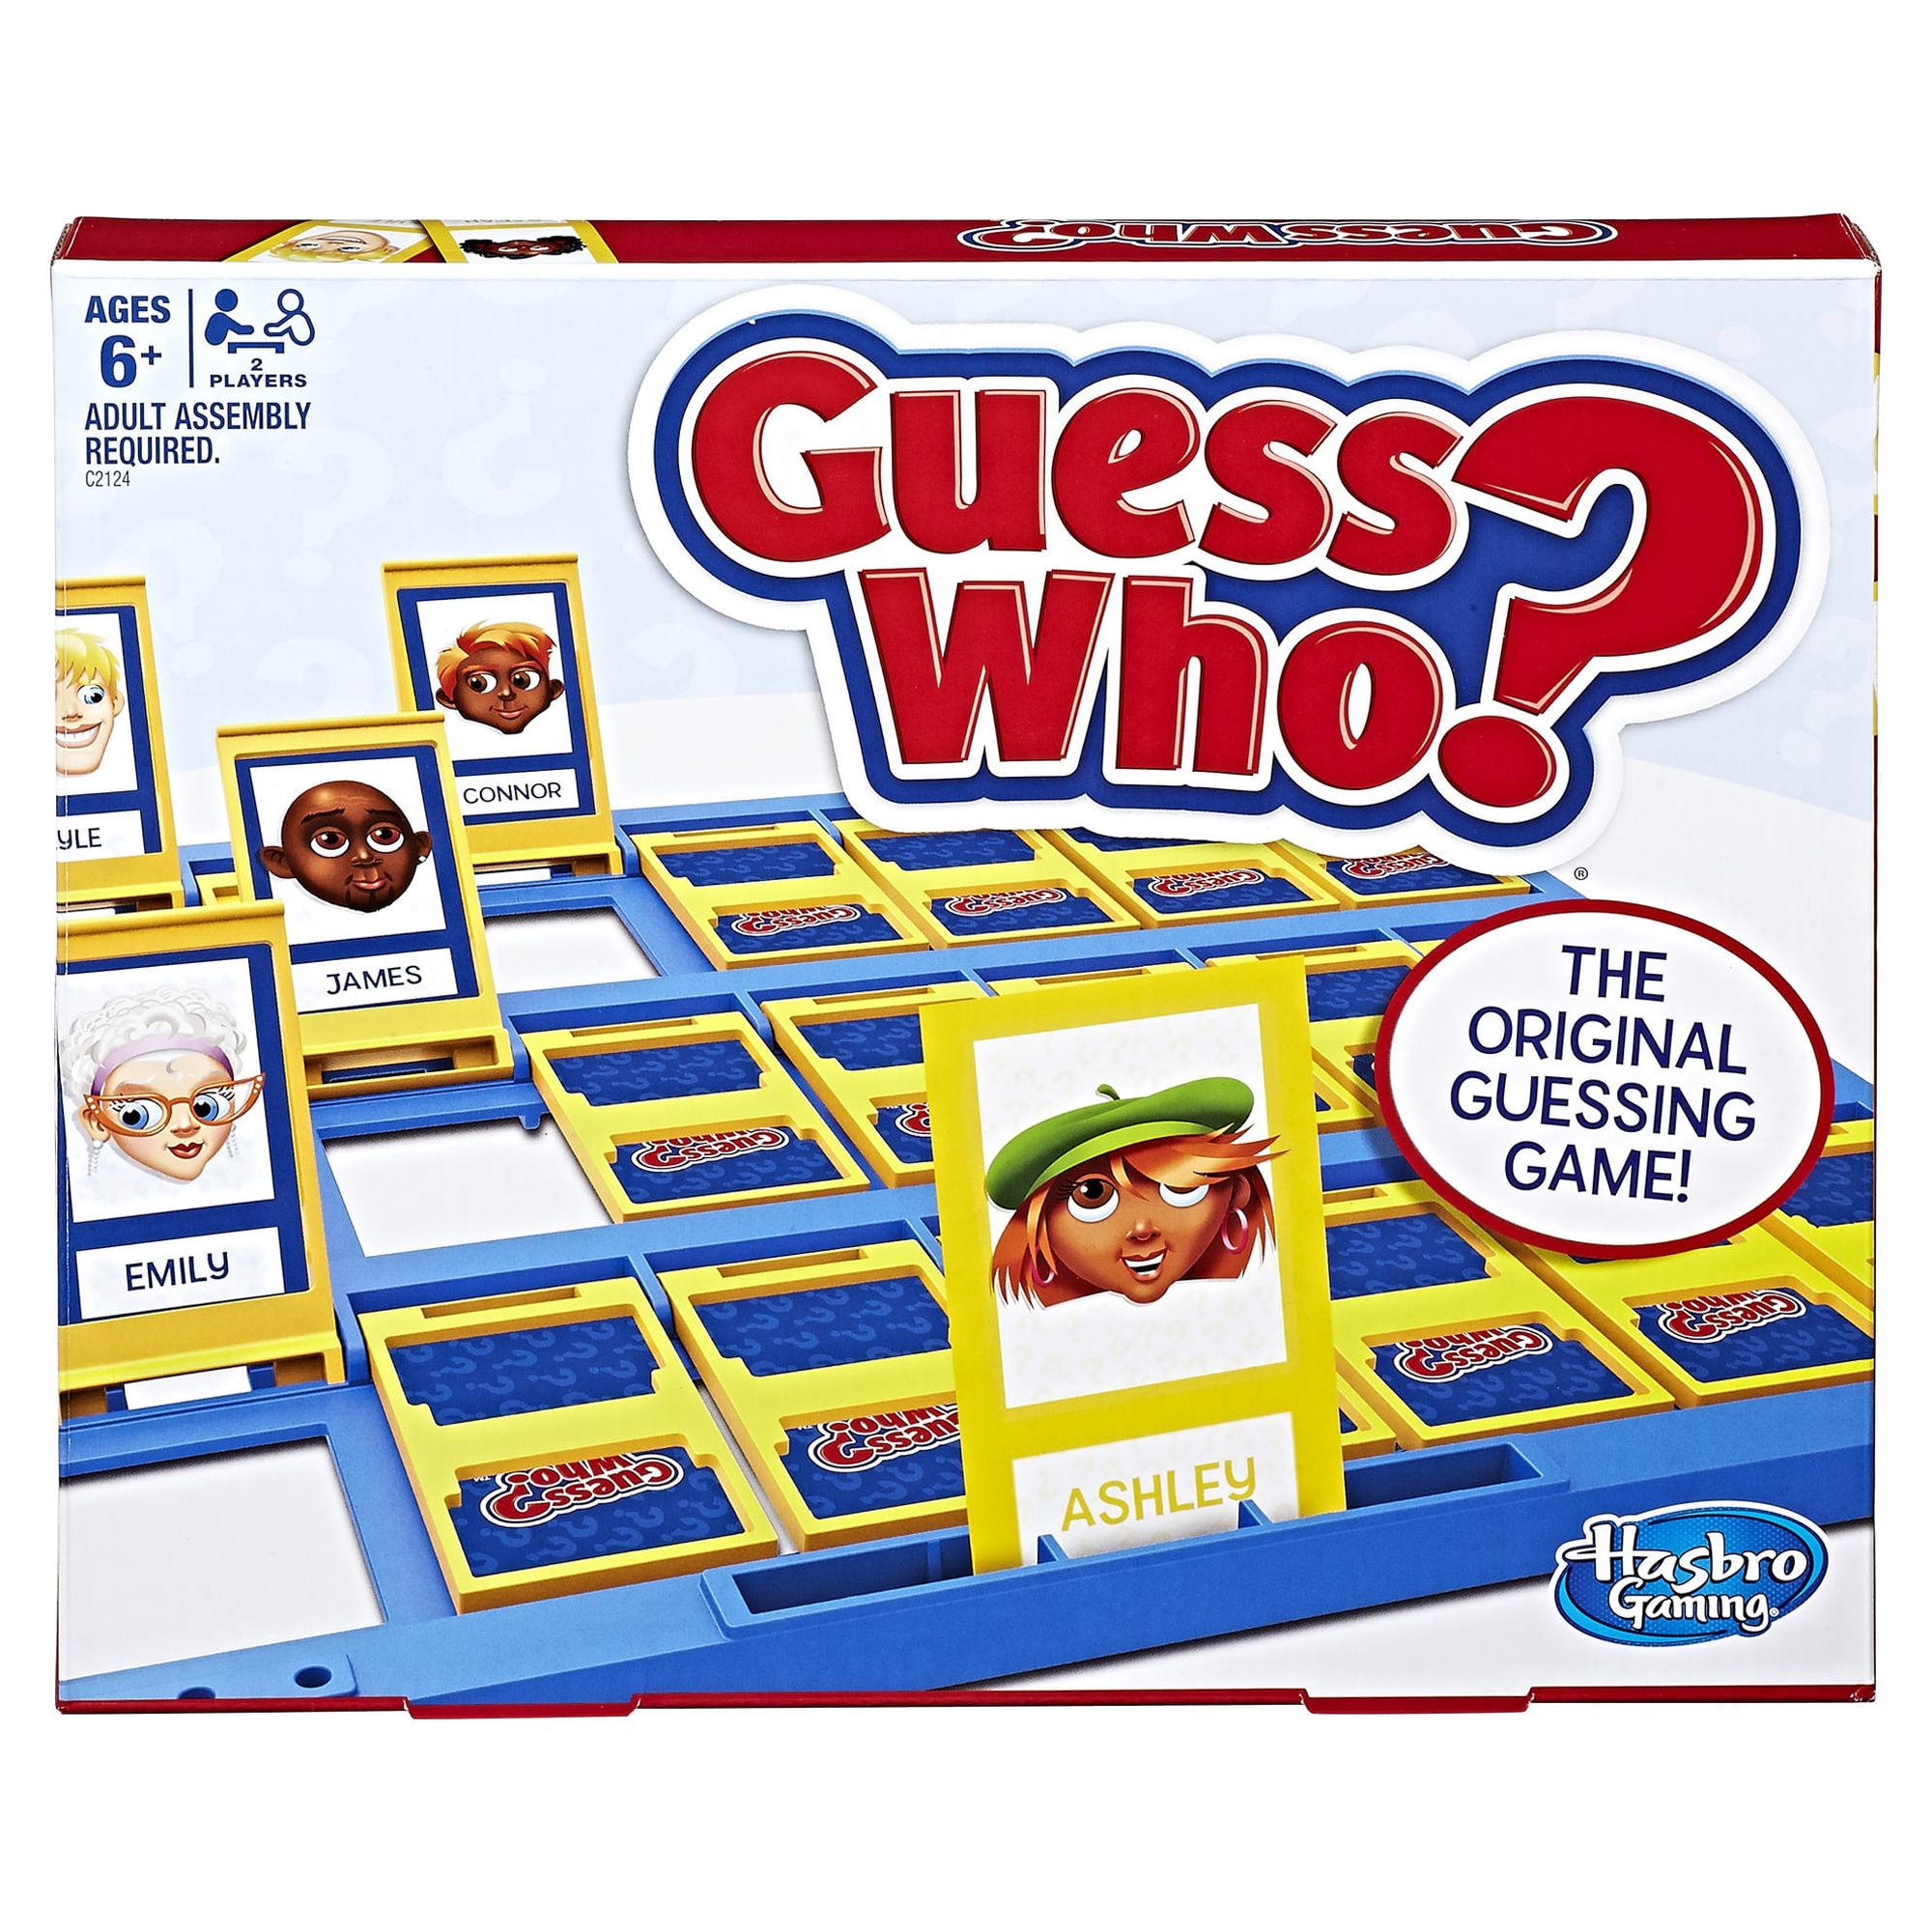 Guess Who? Board Game, Original Guessing Game for Kids, for 2 Players - image 1 of 11